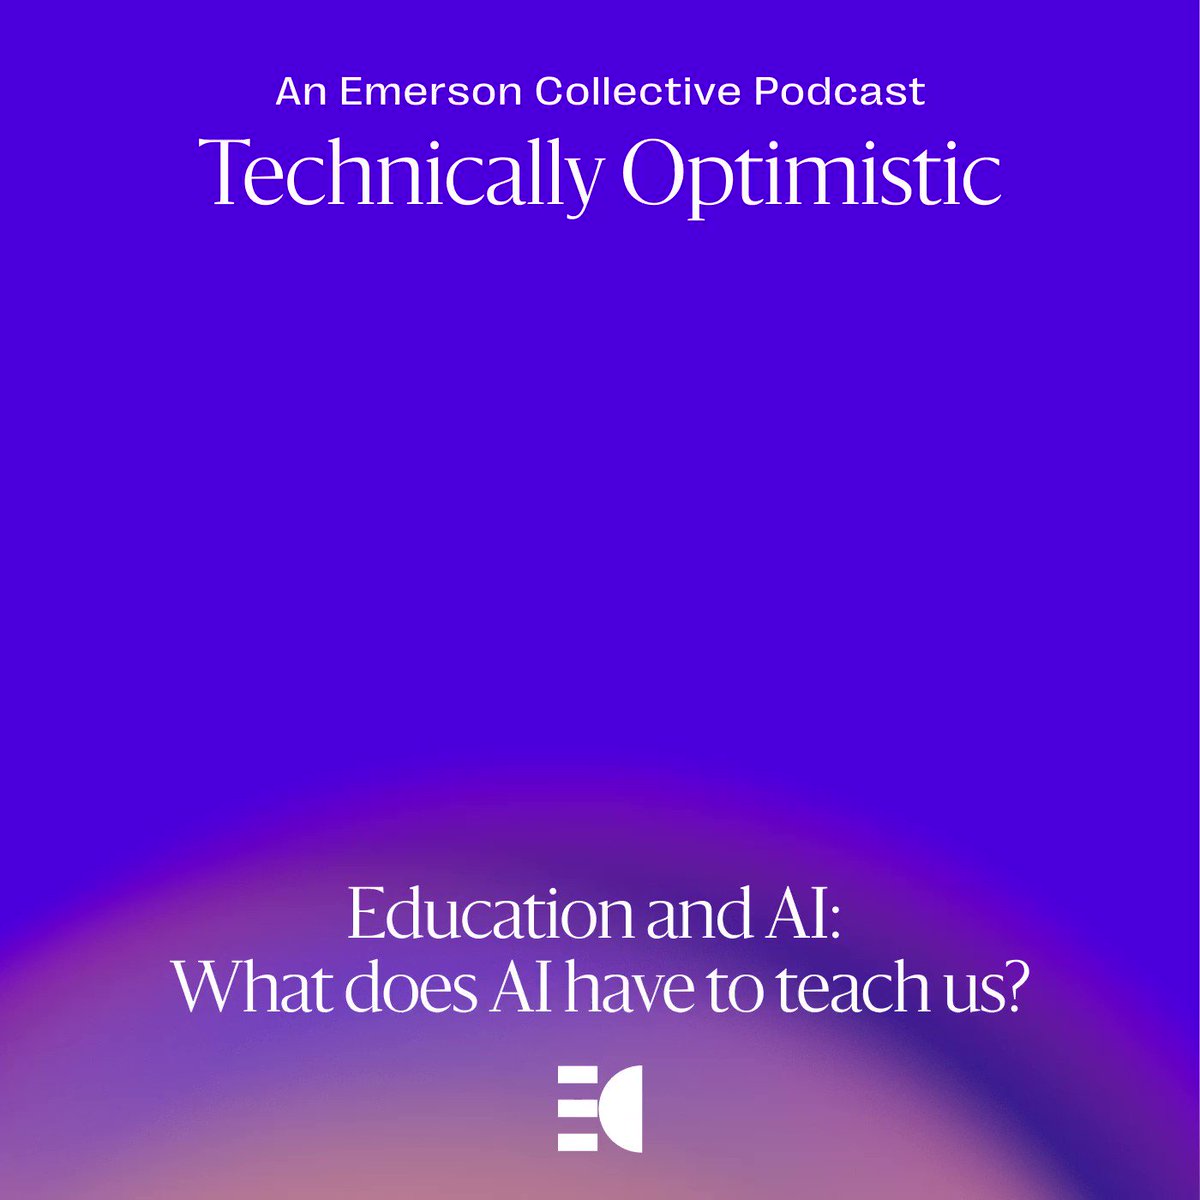 How can AI transform education? In this week's episode of #TechnicallyOptimistic, Sal Khan of Khan Academy shares how he envisions AI making the work of teaching more efficient: https://t.co/oppVuWeqM7 https://t.co/jd57A2fQgs